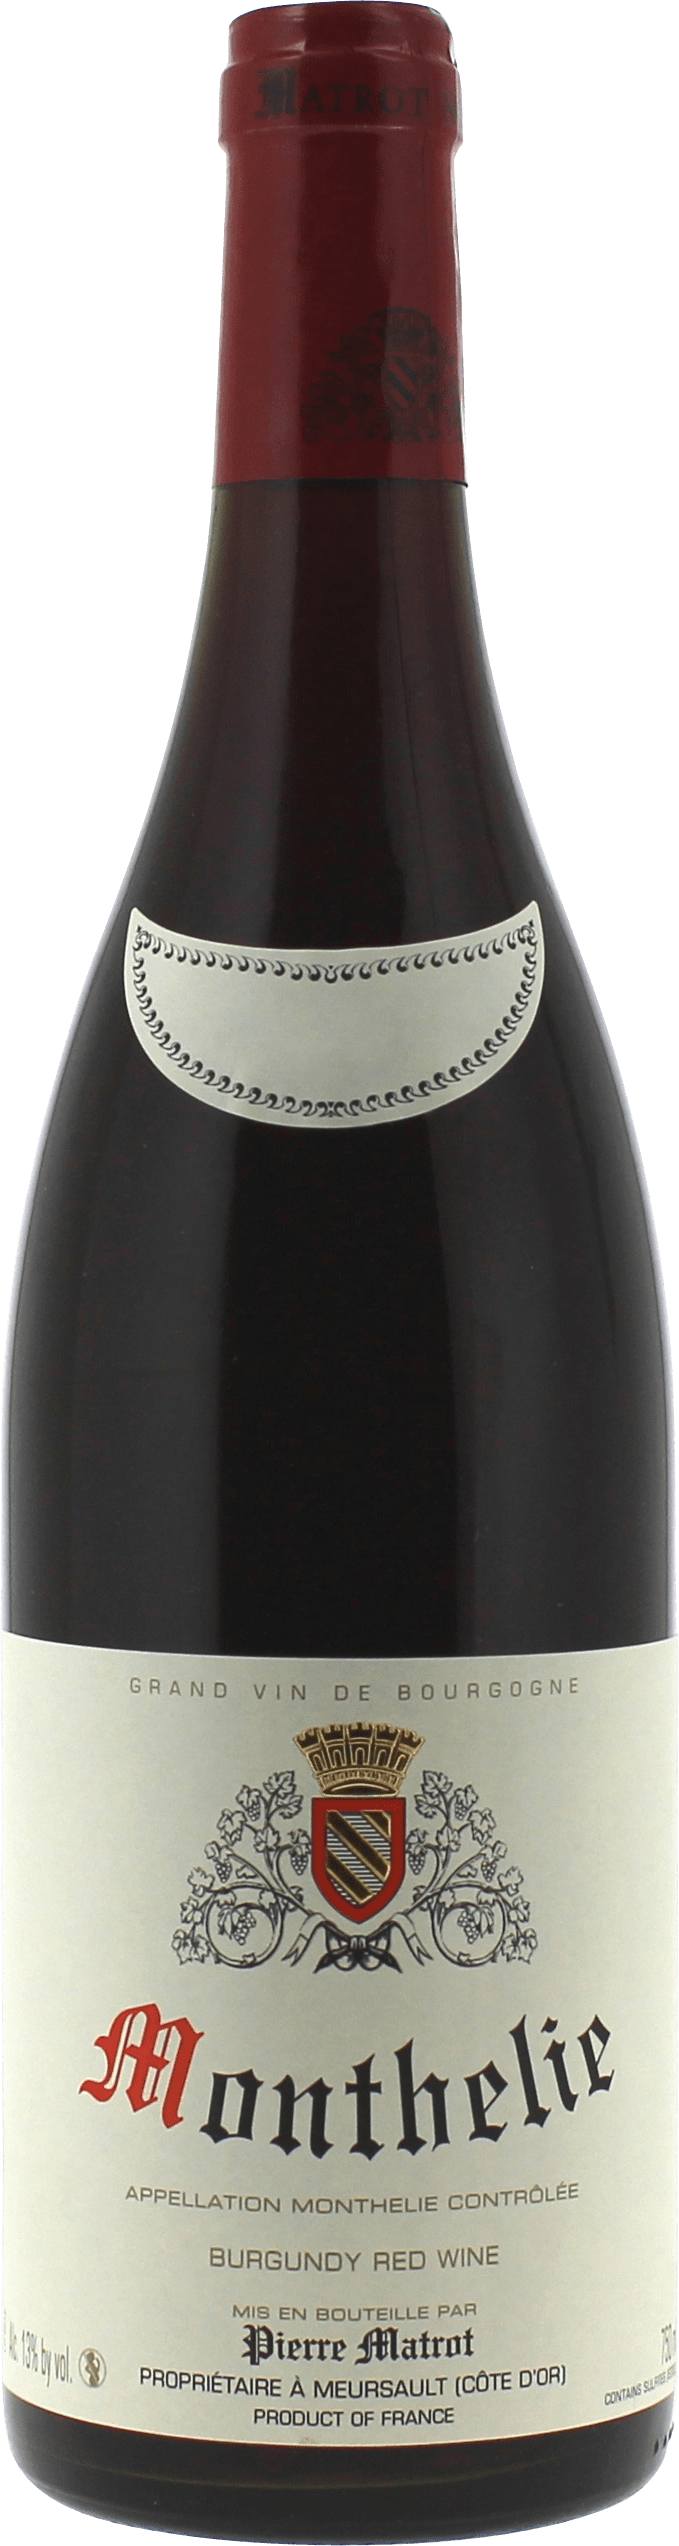 Monthelie 2015 Domaine MATROT, Bourgogne rouge